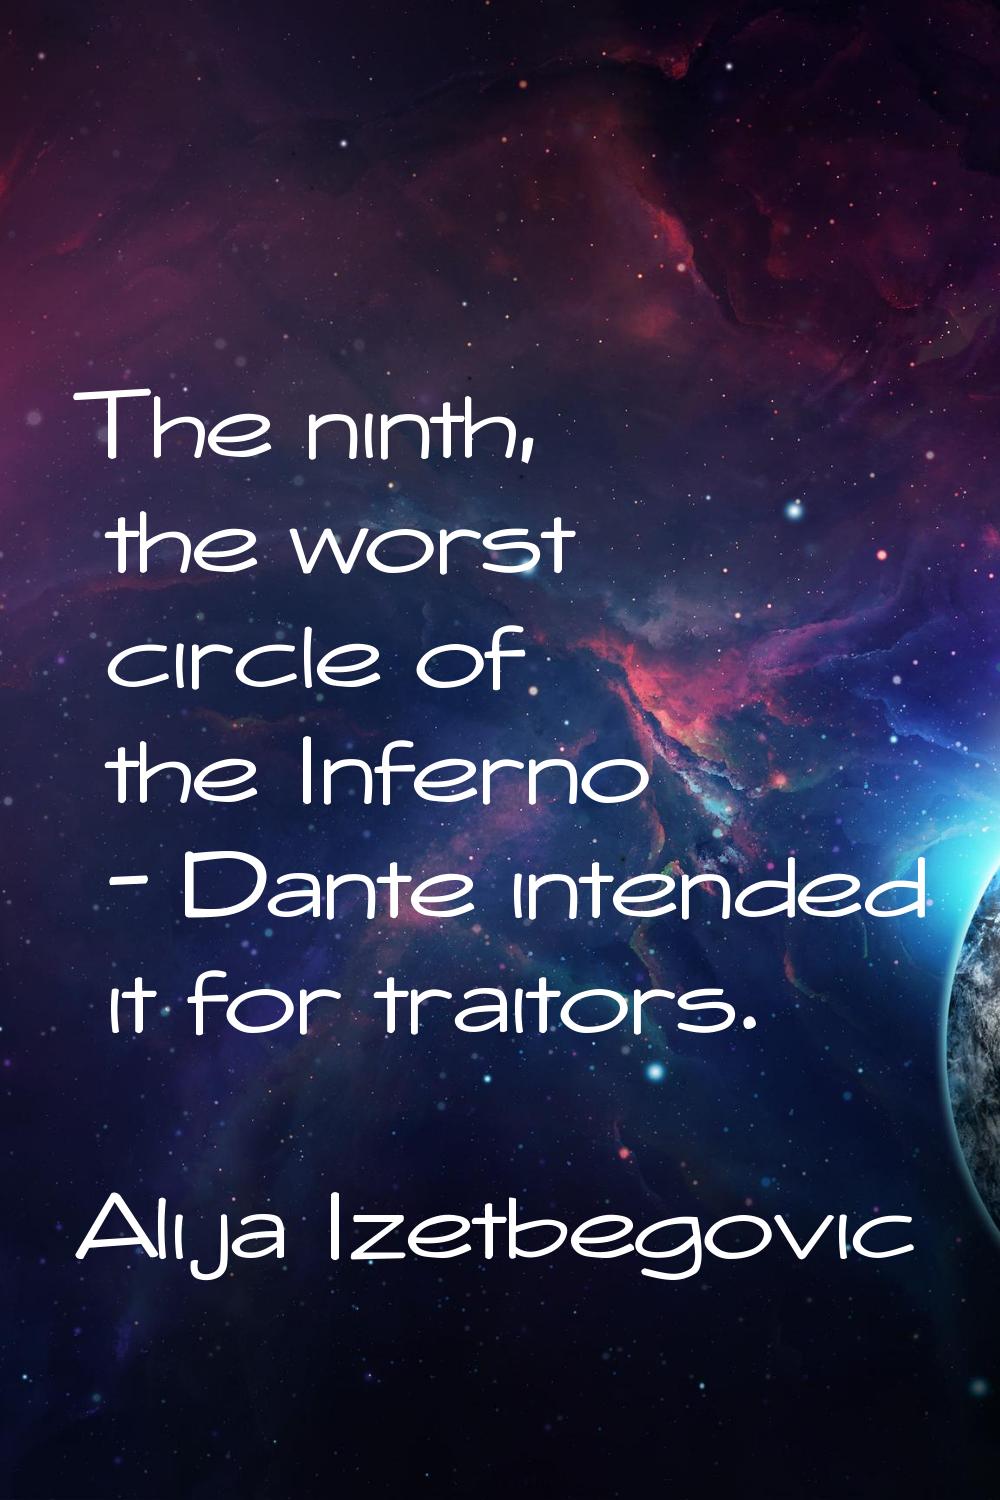 The ninth, the worst circle of the Inferno - Dante intended it for traitors.